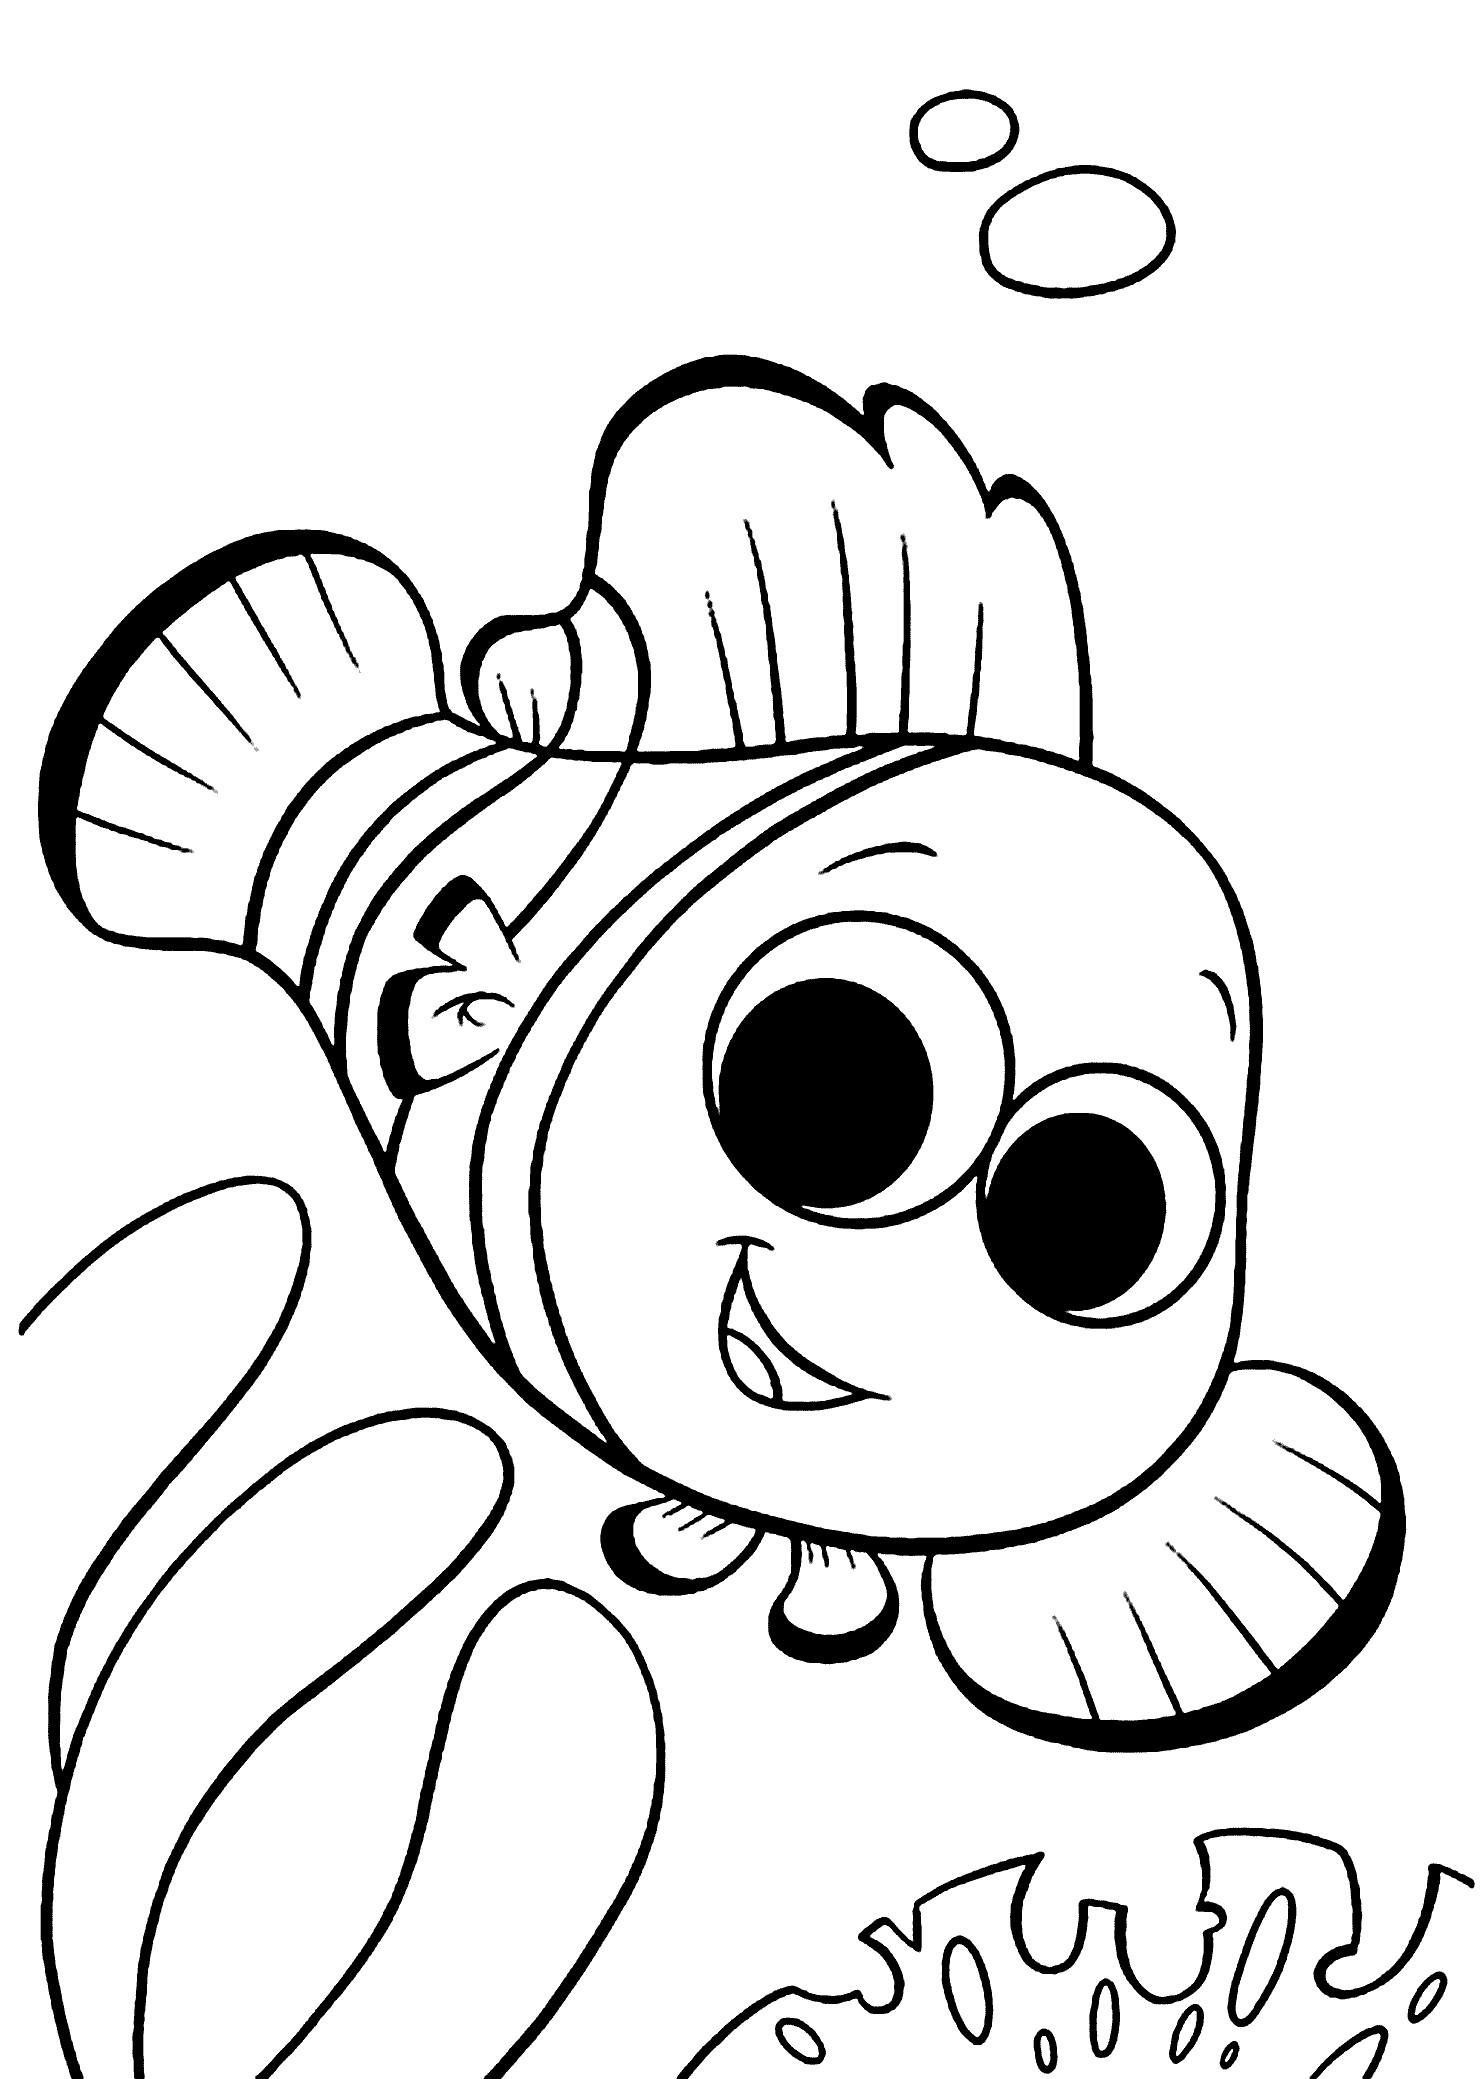 Free Coloring Sheets For Kids Kate Dicamillo
 Finding Nemo coloring pages for kids printable free